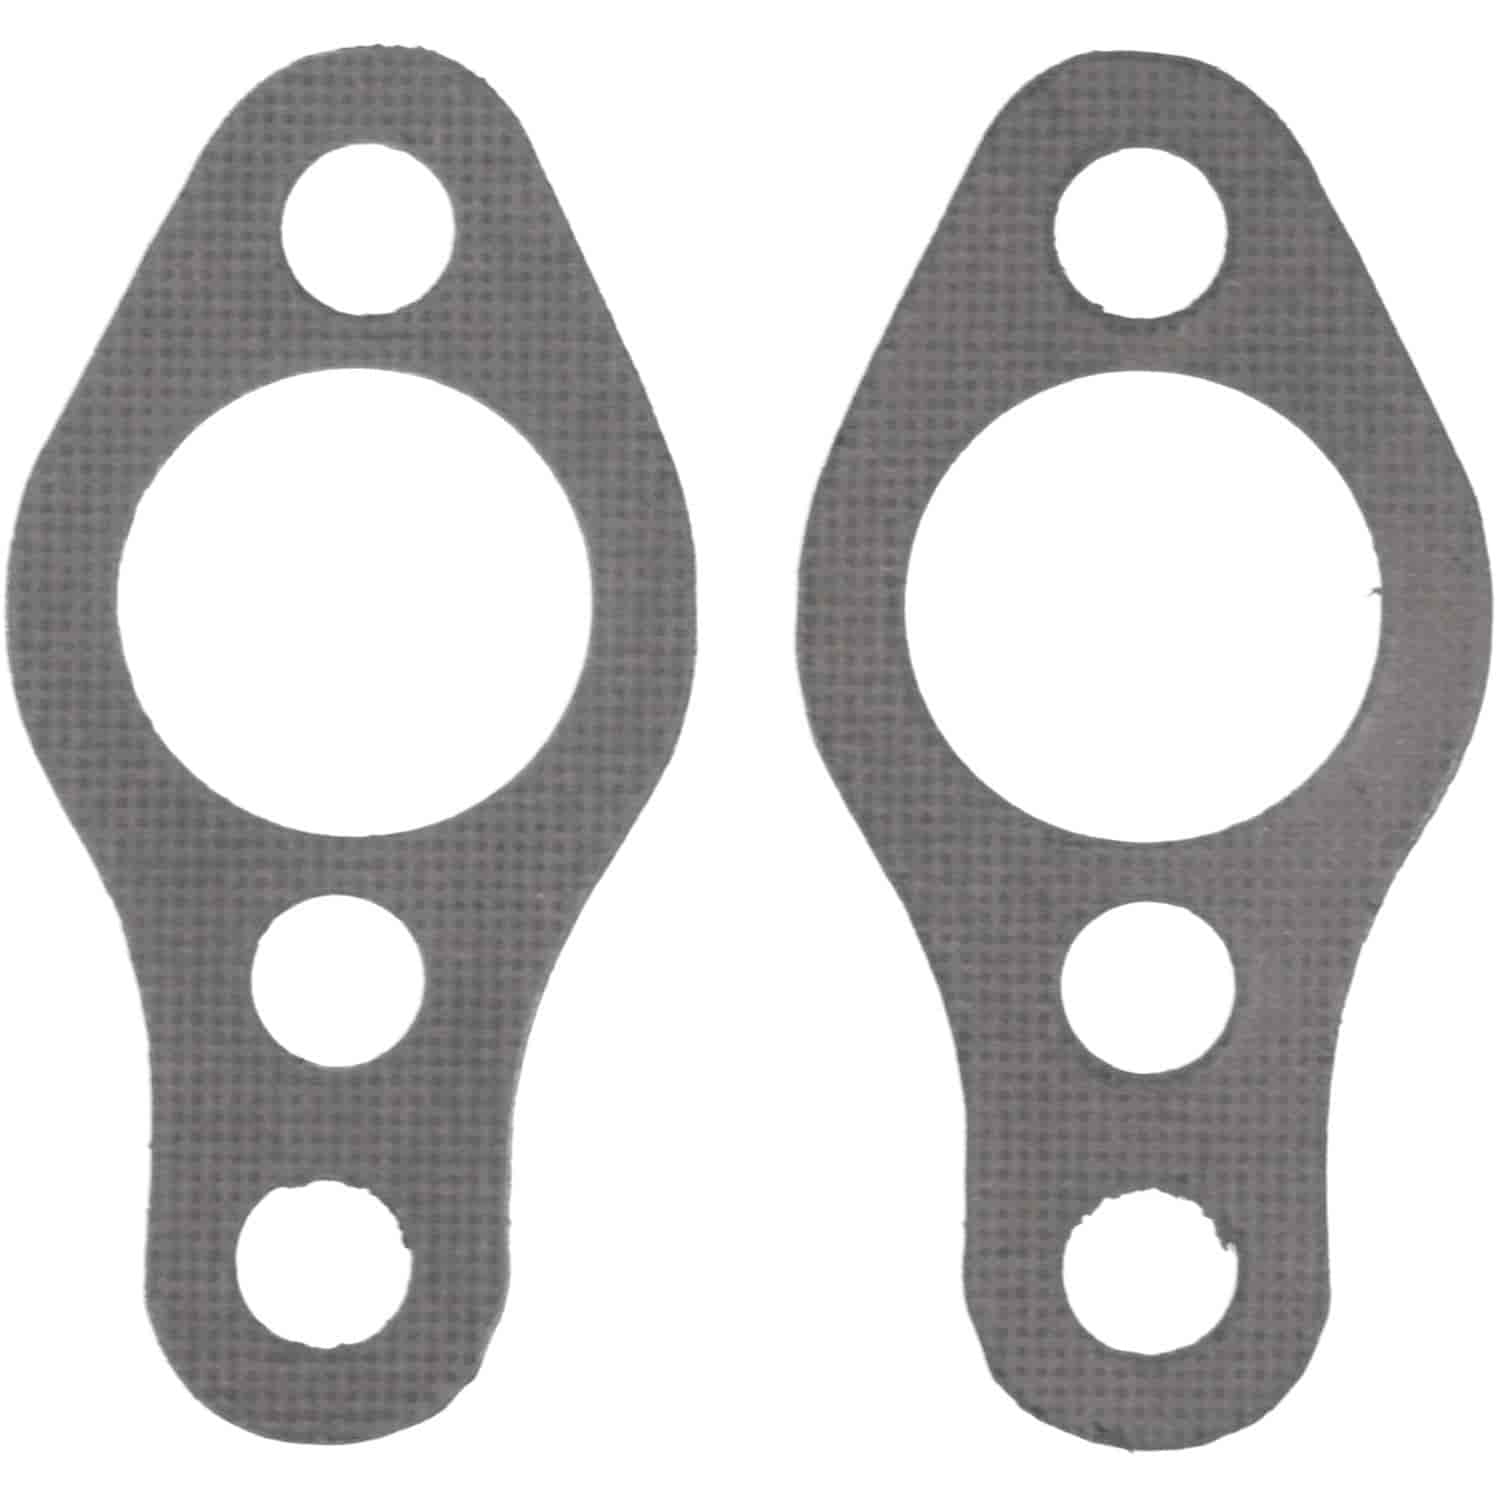 Water Pump Gasket 1968-1989 Small Block Chevy